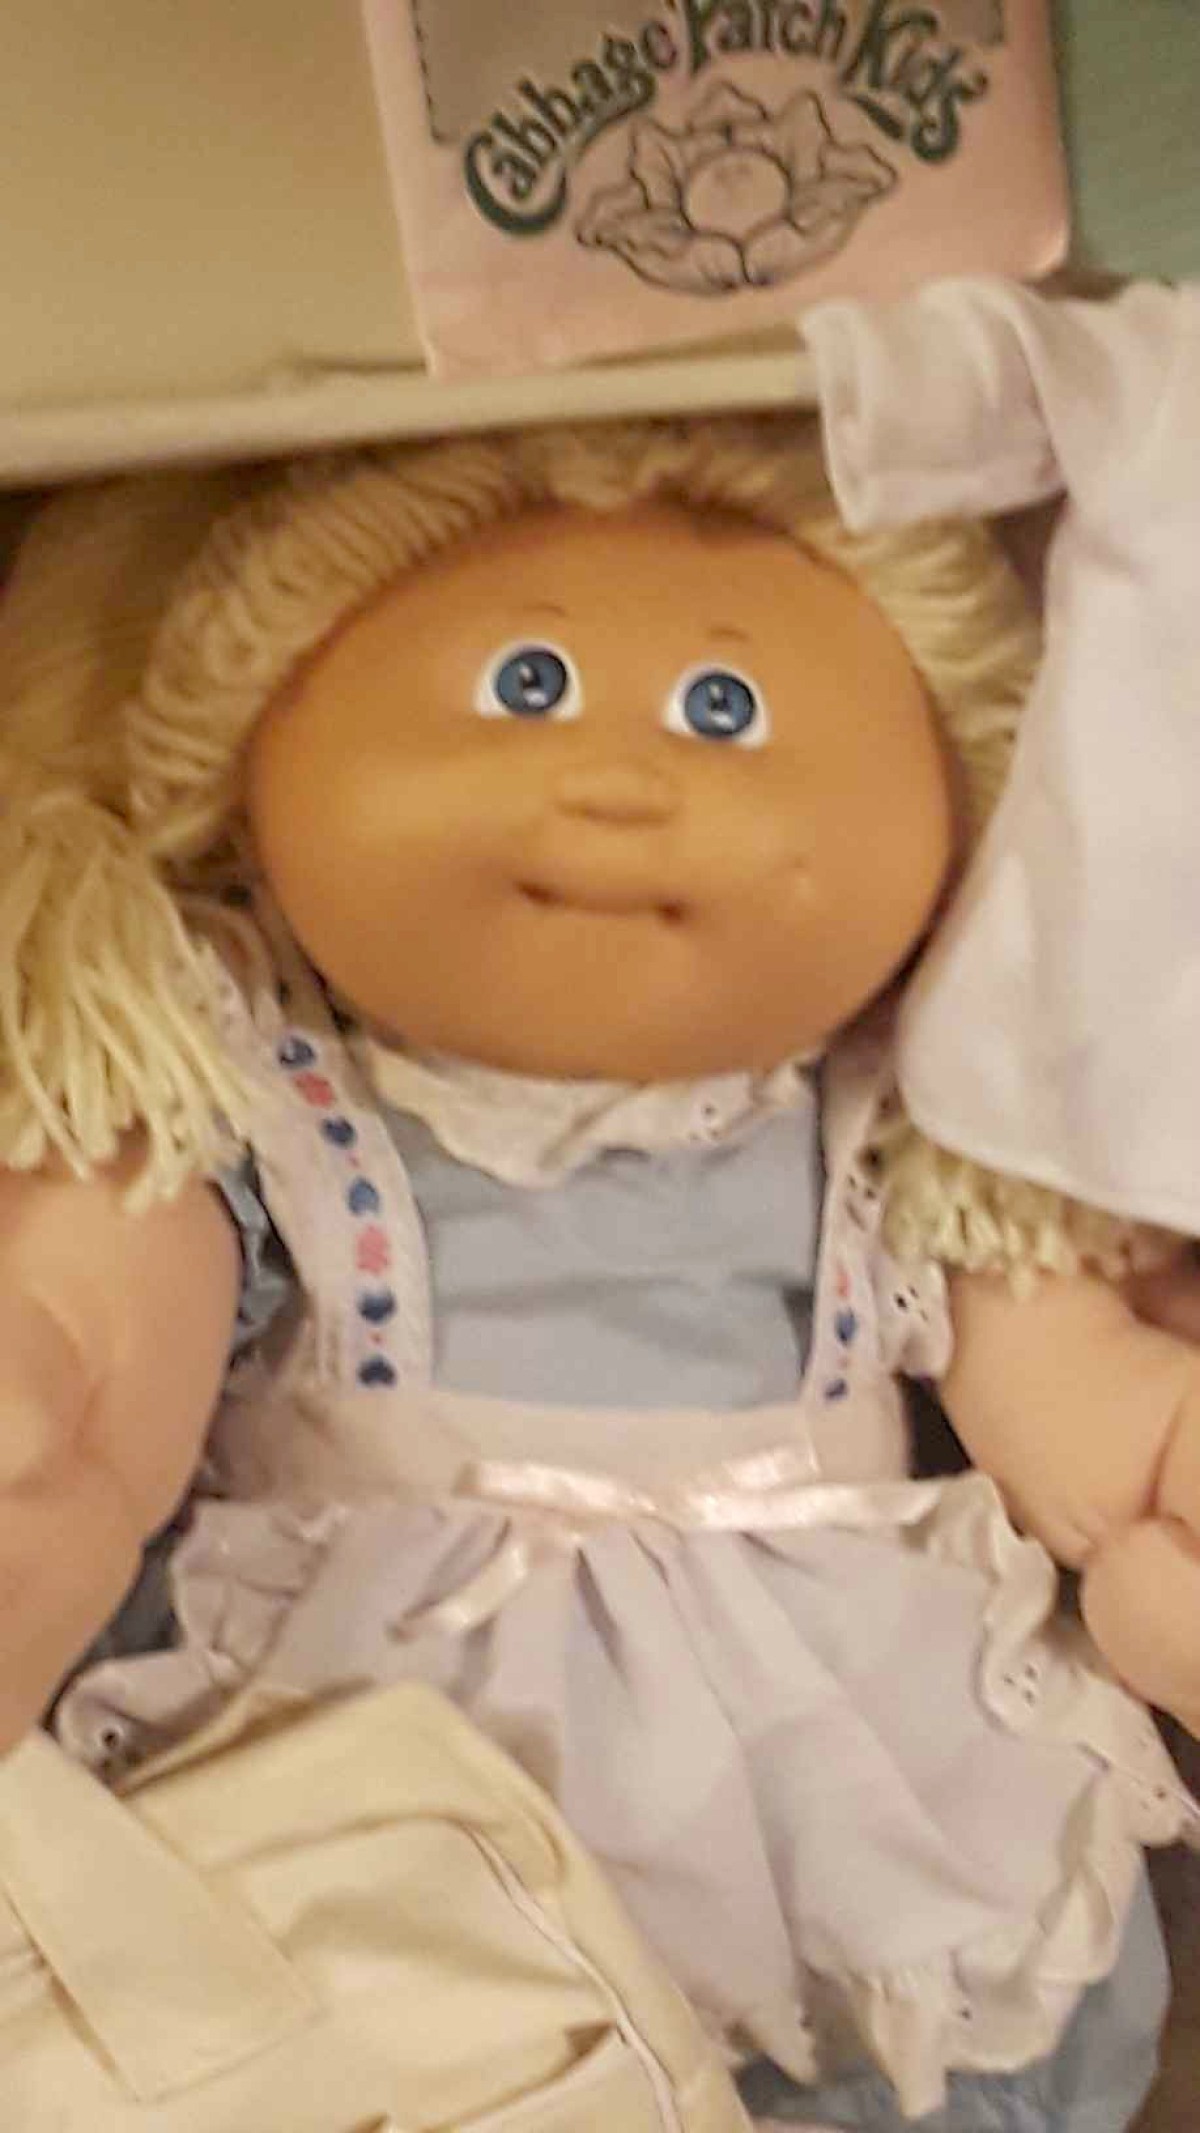 cabbage patch dolls collectibles prices